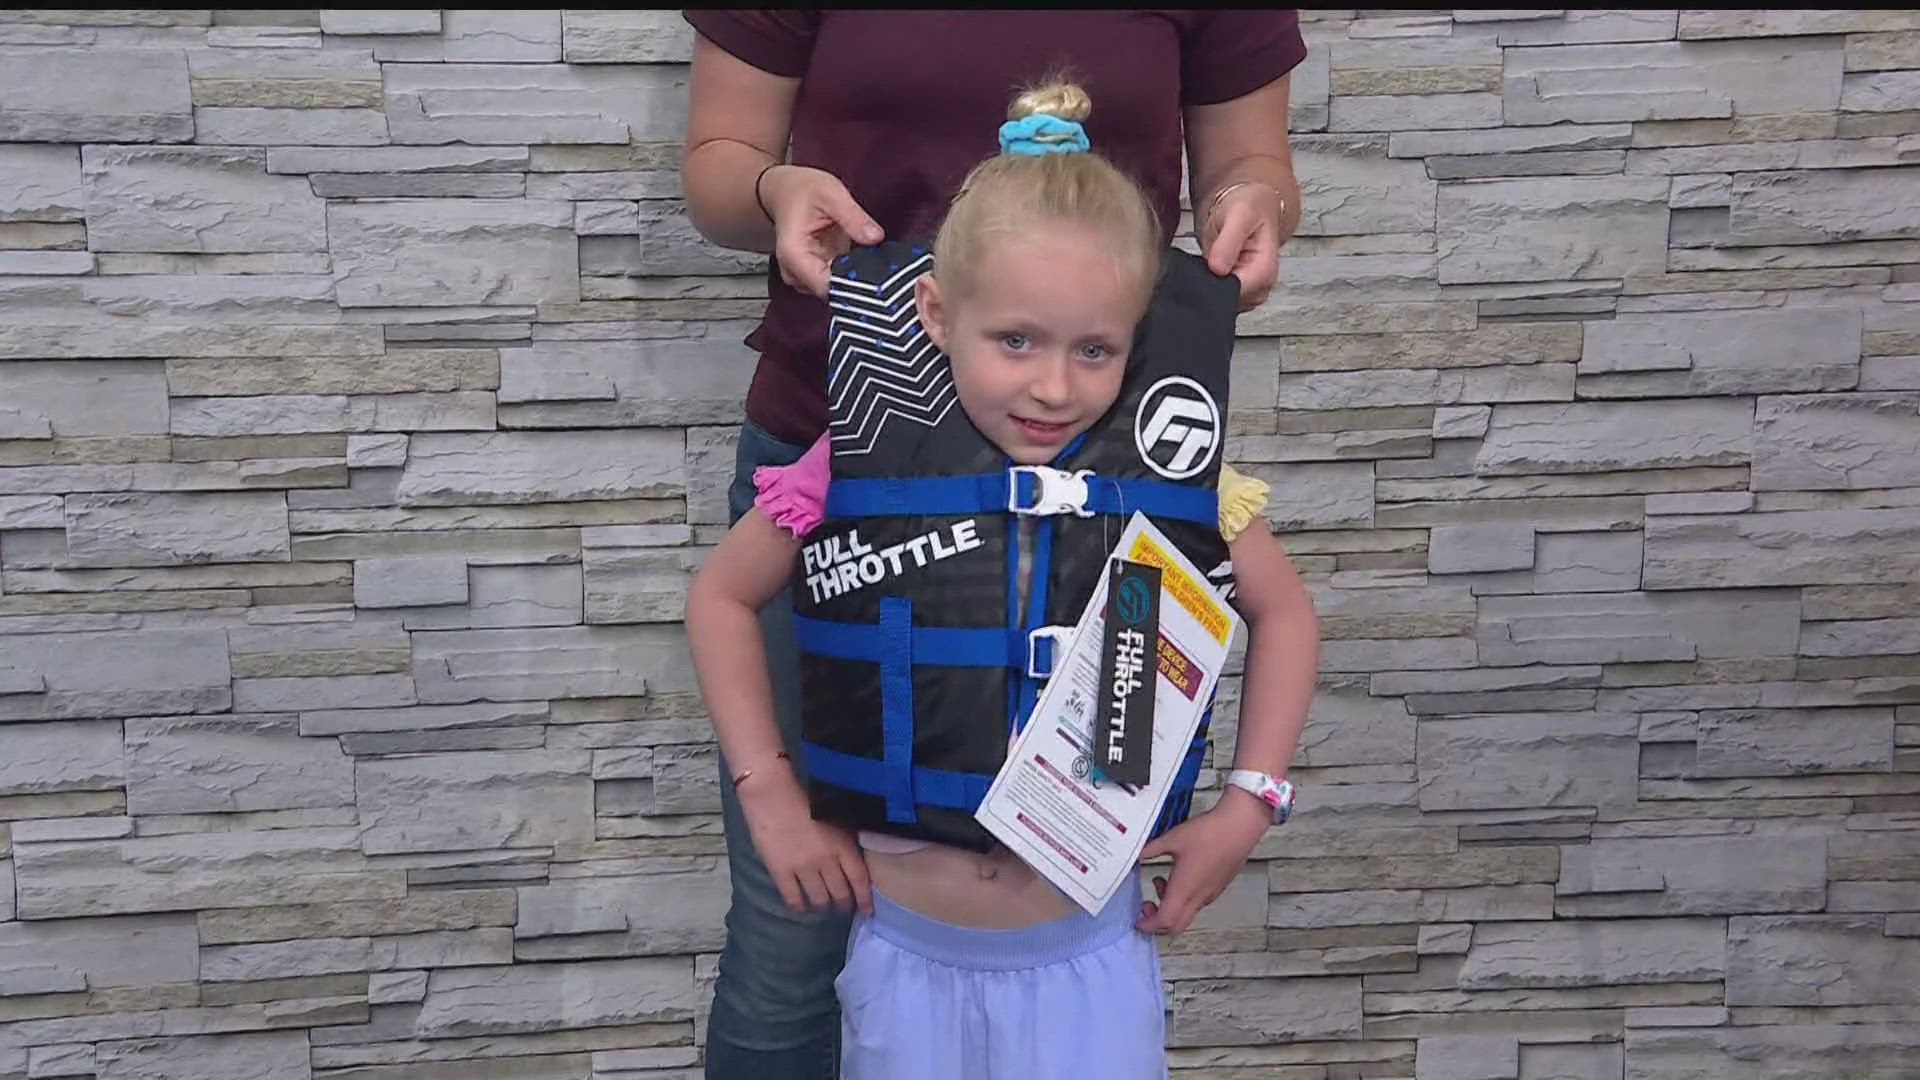 Life jackets are a must have if you plan on being on boats or Minnesota lakes. Here's one test you can do to make sure your child's life jacket is the right size.